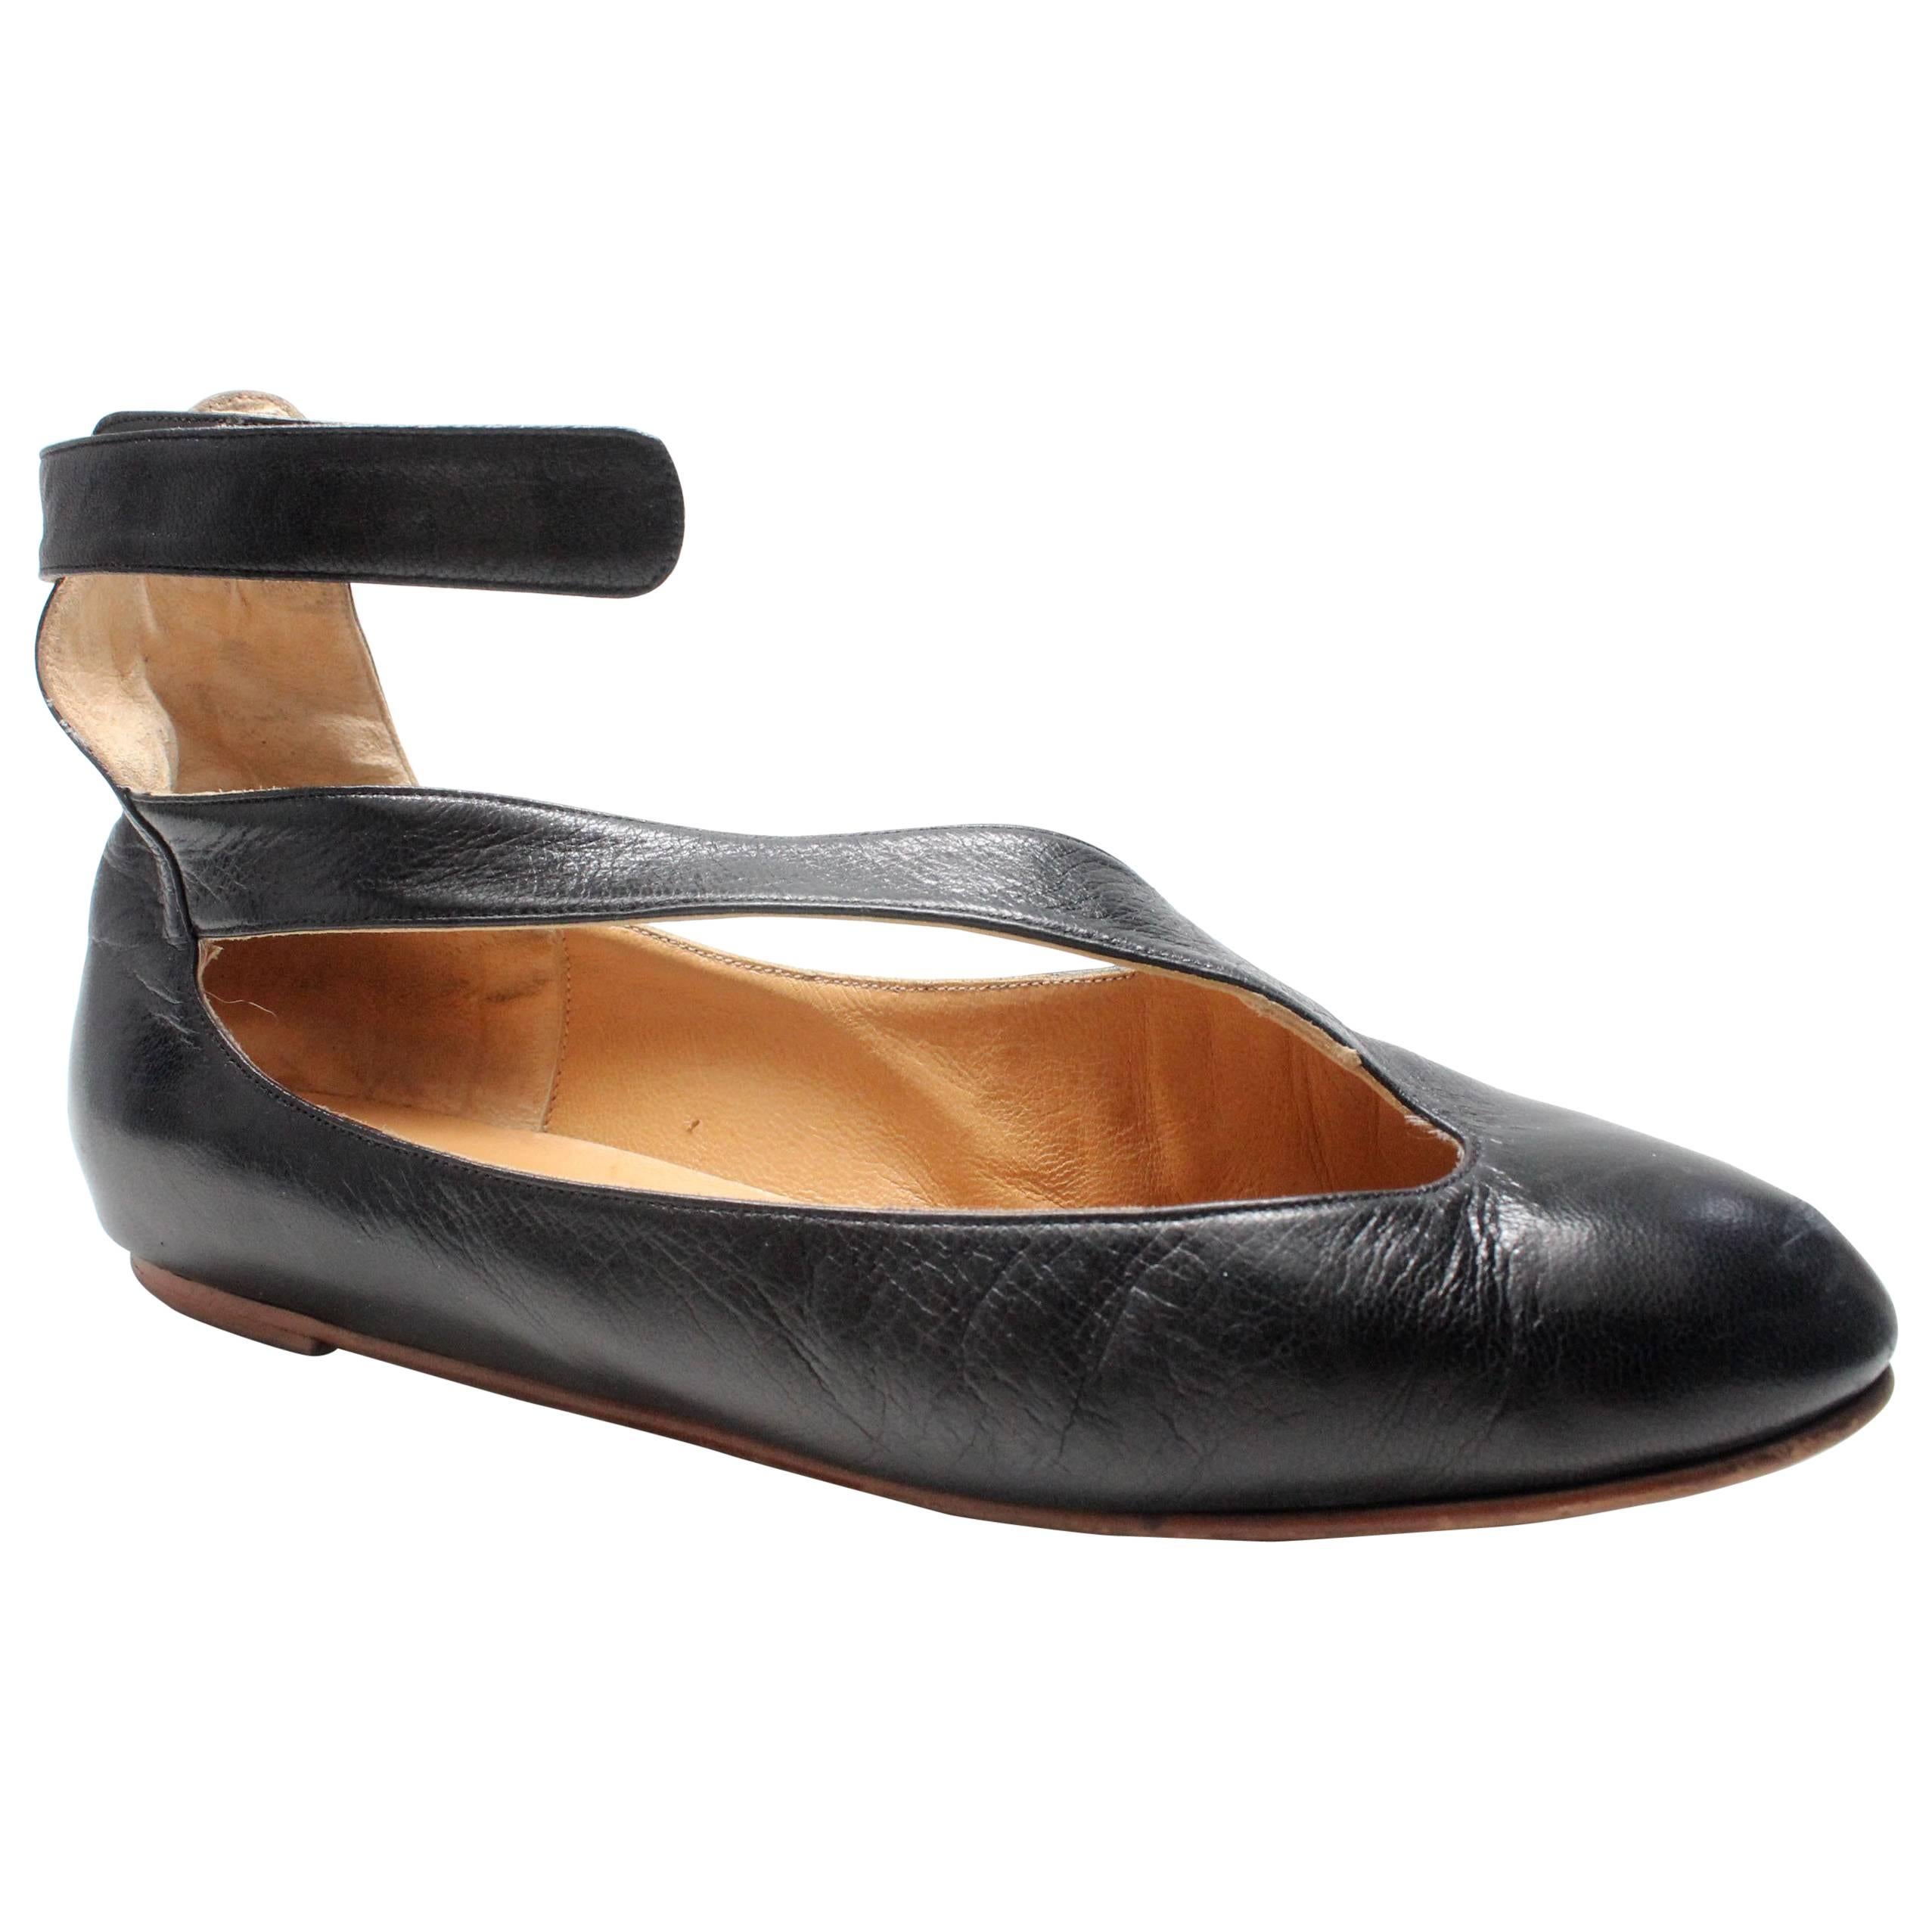 Norma Kamali Leather Ballet Flat with Ankle Strap